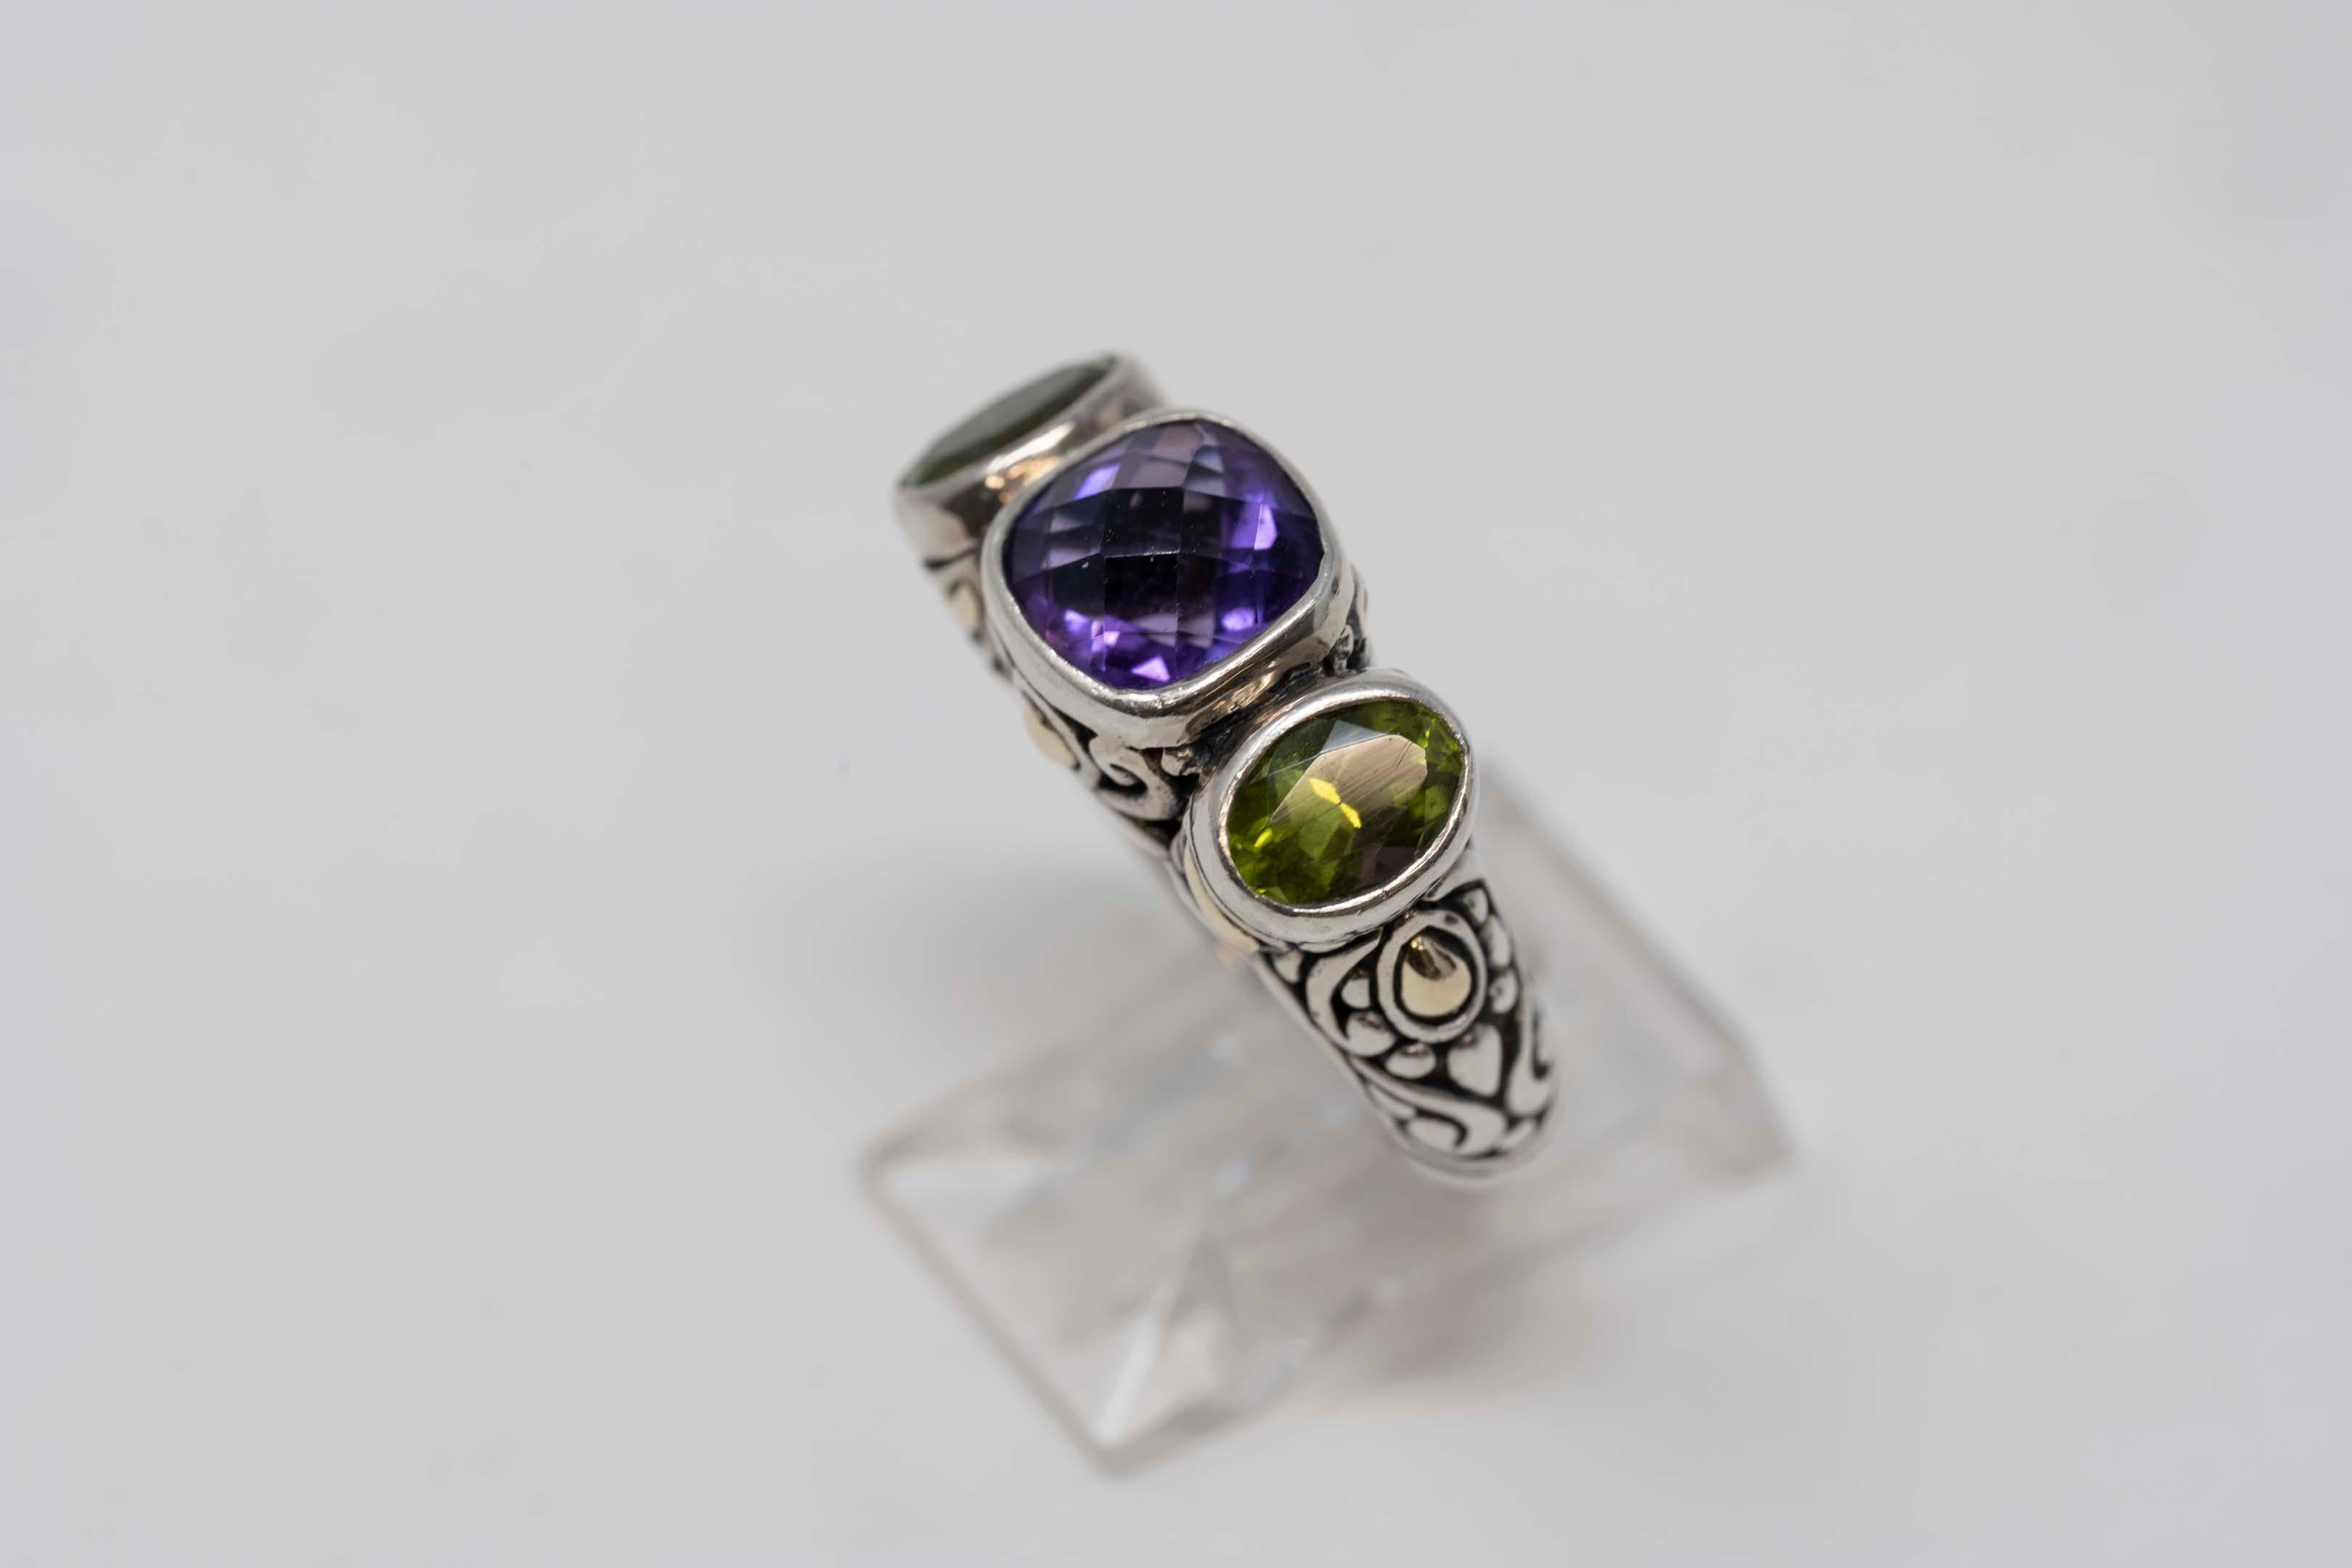 Samuel Benham 18k and 925 silver ring with natural amethyst & peridot gemstones, stamped inside B.J.C. 925, size 7 3/4, preowned.